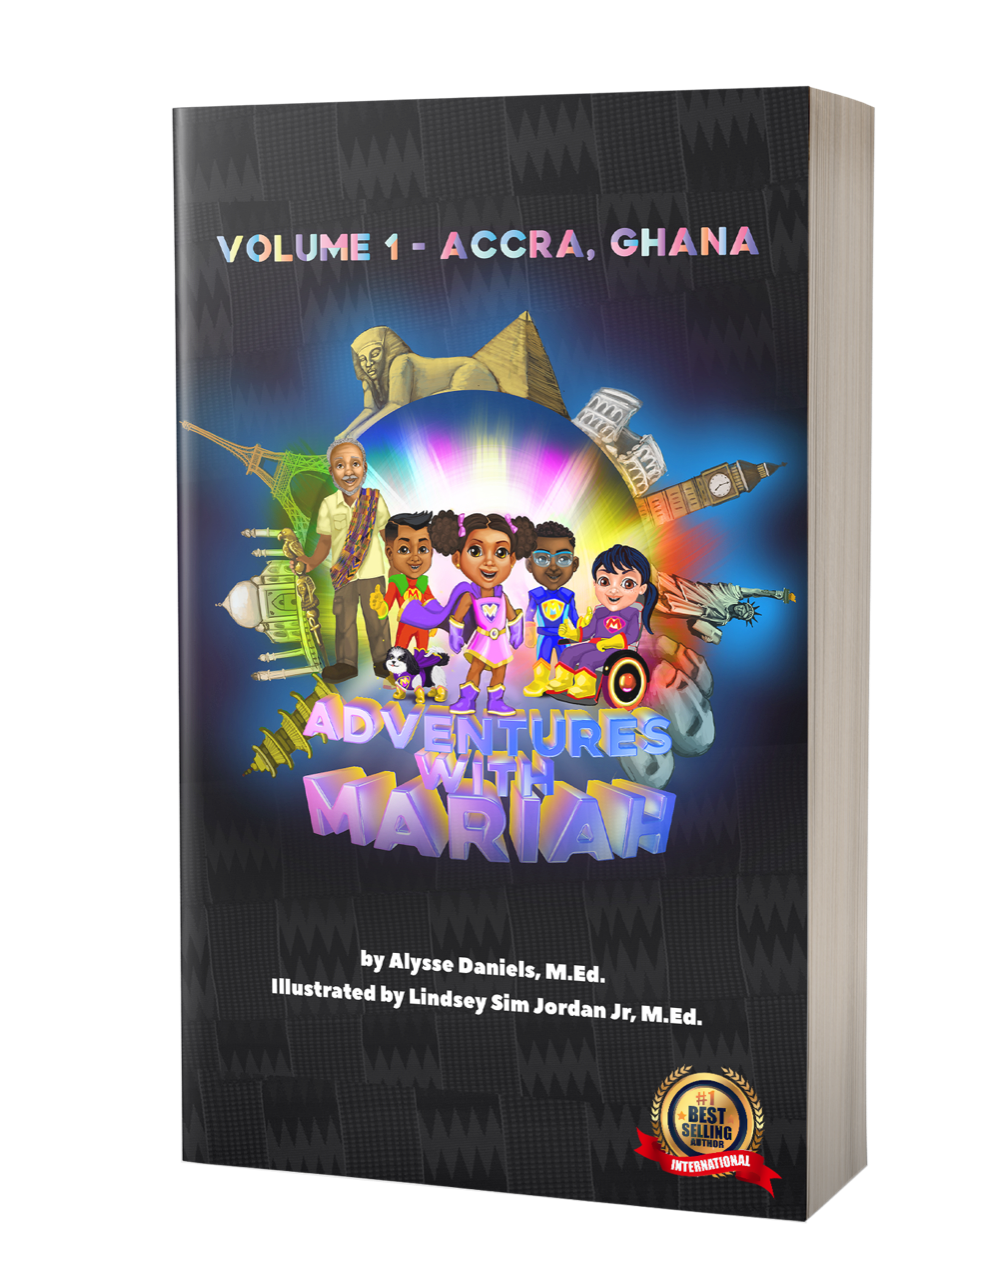 Adventures With Mariah! Volume I - Accra, Ghana - Paperback